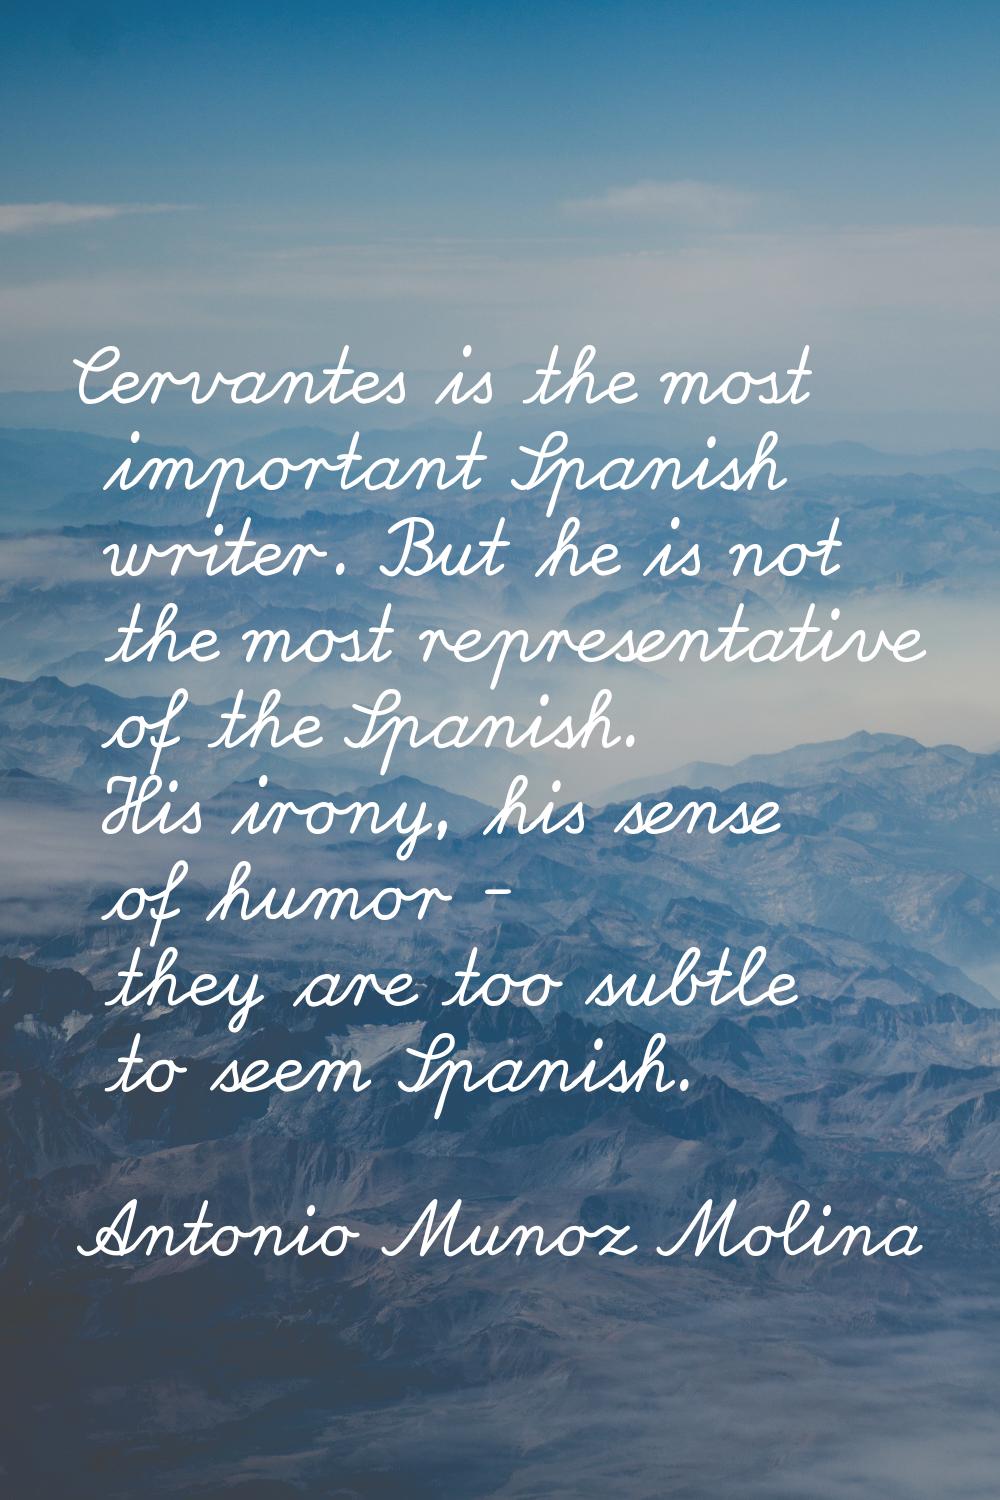 Cervantes is the most important Spanish writer. But he is not the most representative of the Spanis